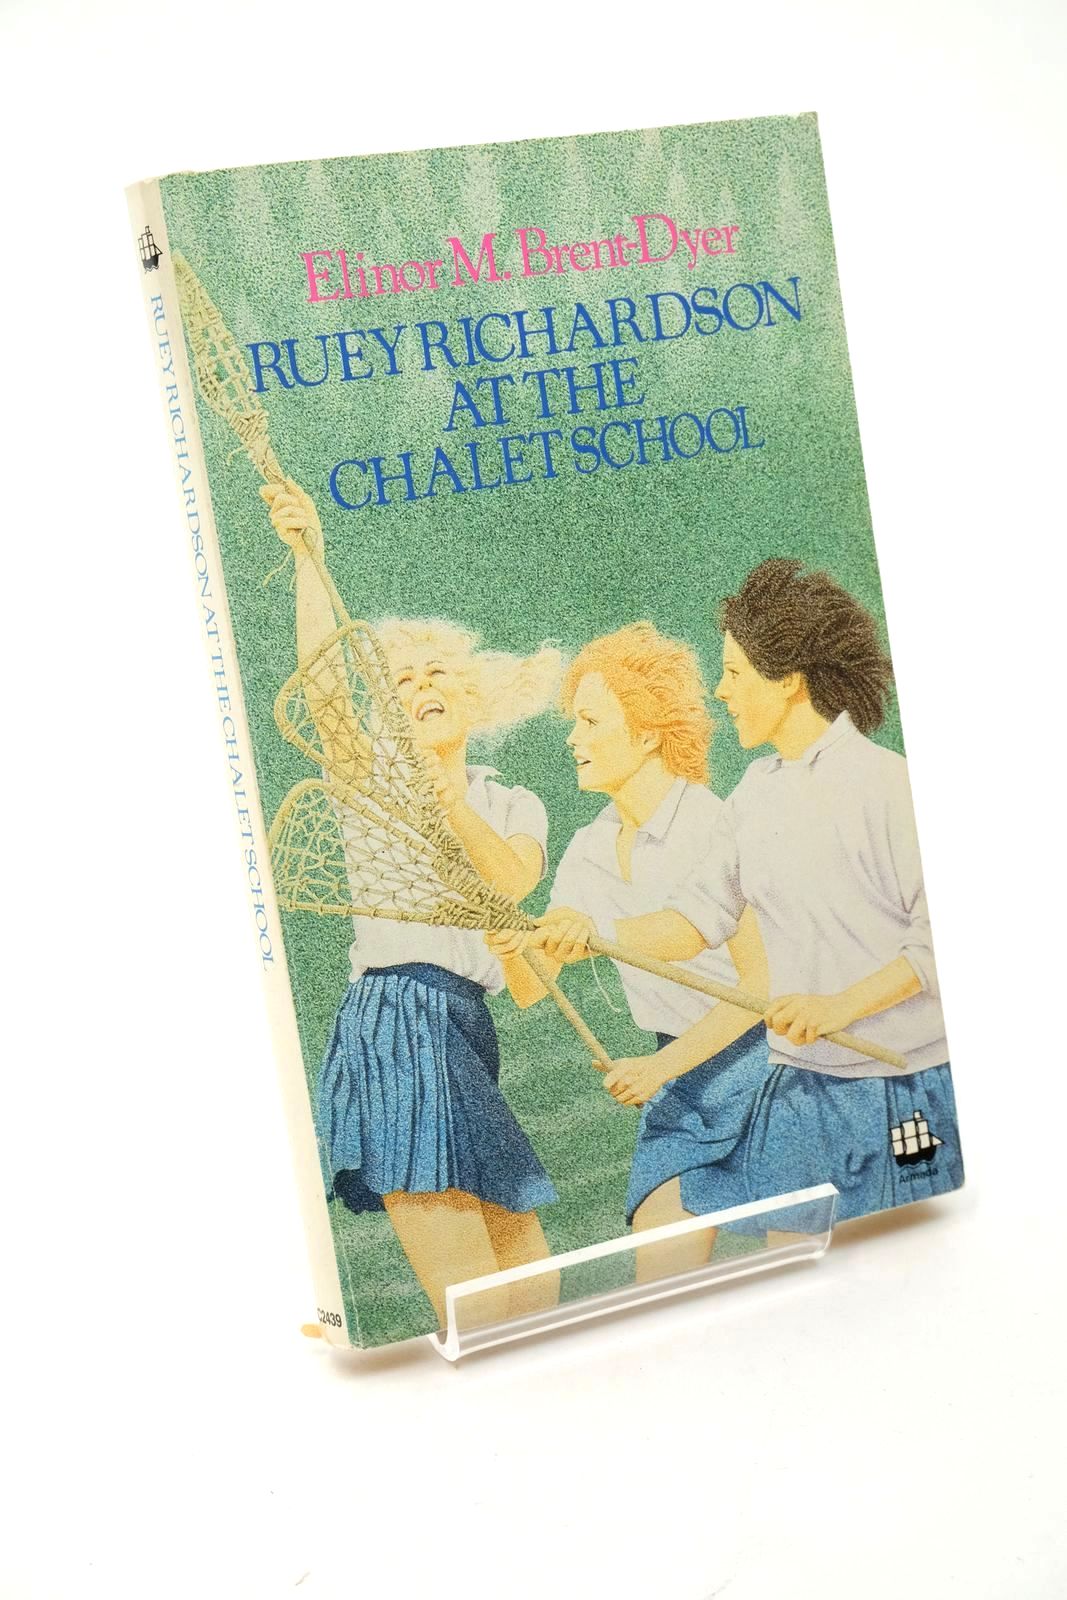 Photo of RUEY RICHARDSON AT THE CHALET SCHOOL- Stock Number: 1322575